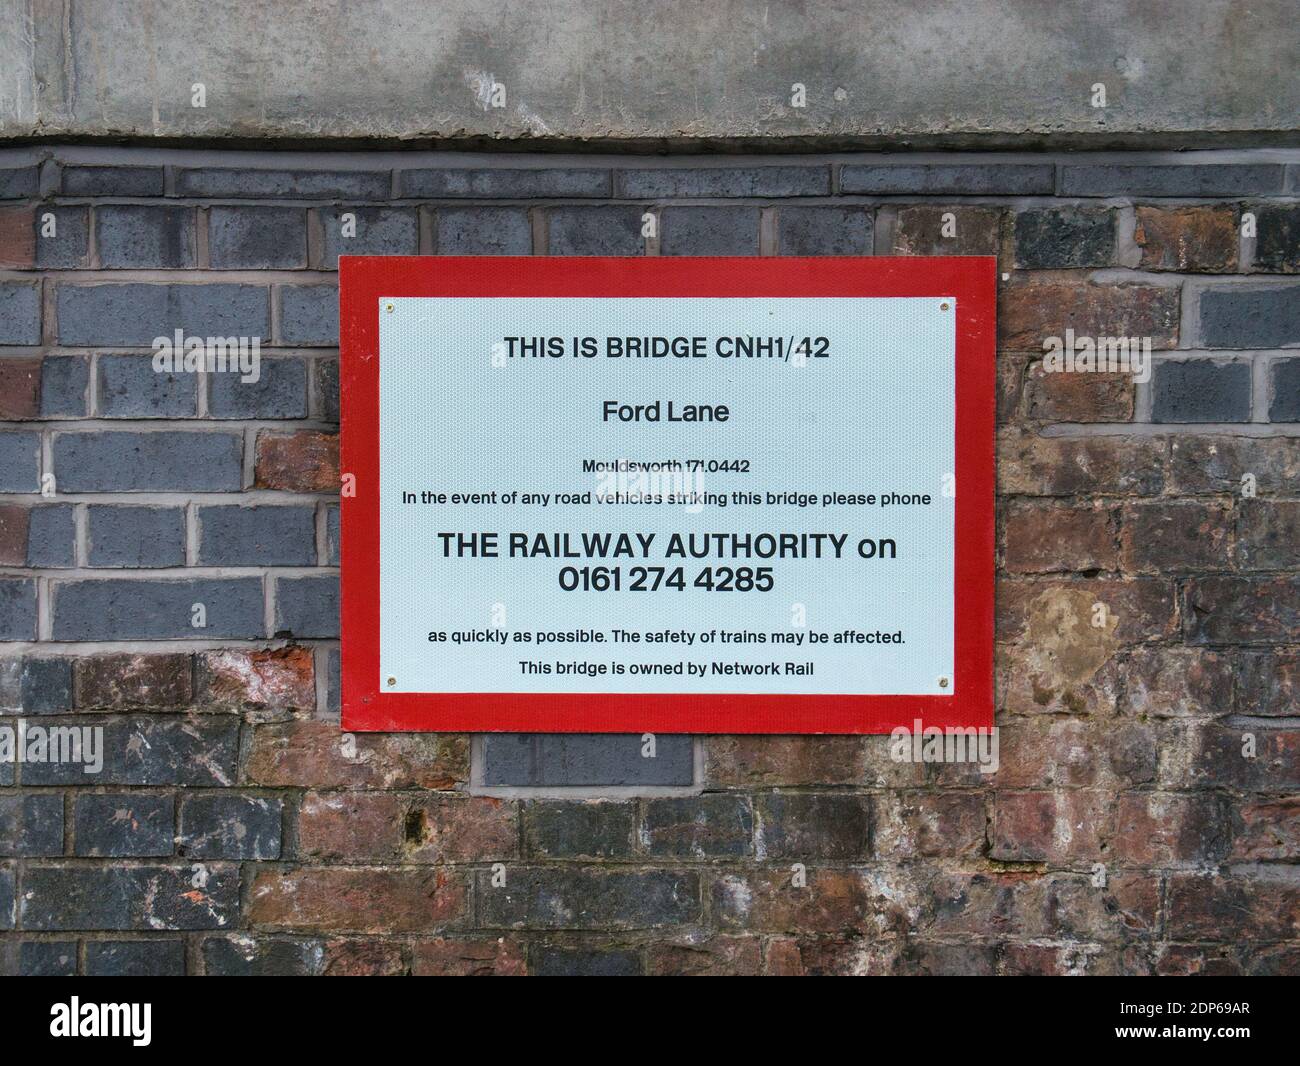 A Network Rail sign under a railway bridge with a phone number to be called in the event of a road vehicle collision with the bridge. Stock Photo